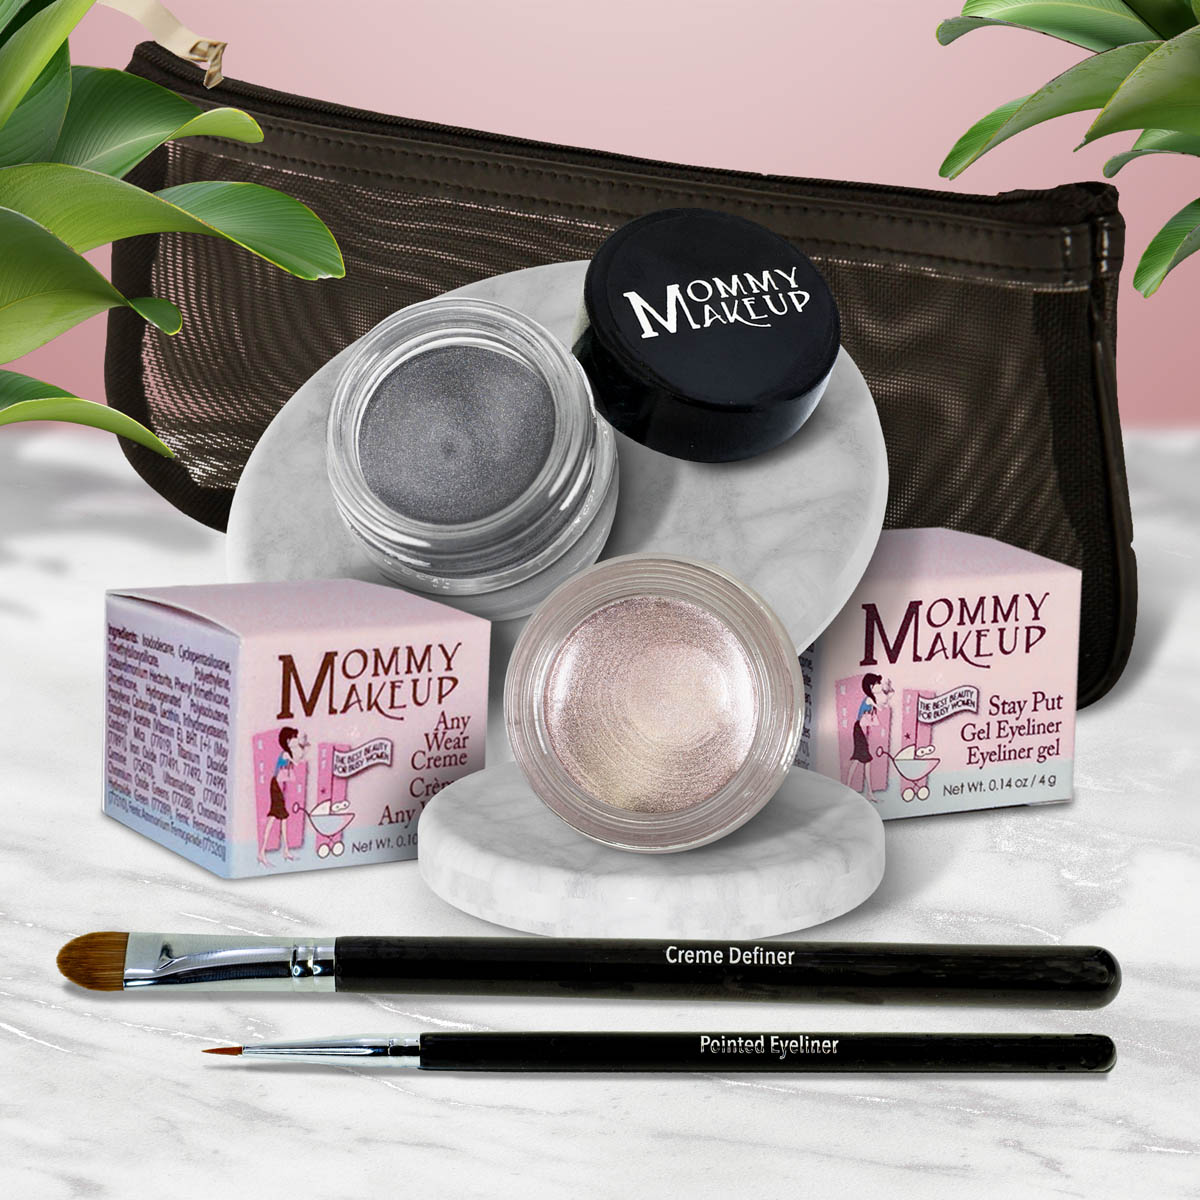 5 piece waterproof eye makeup set. Eyeliner, Eye shadow, brushes. Allergy tested, cruelty free. Made in USA. Crystal - A Pale Shimmering Pewter and Steel Magnolia - Deep grey with shimmer